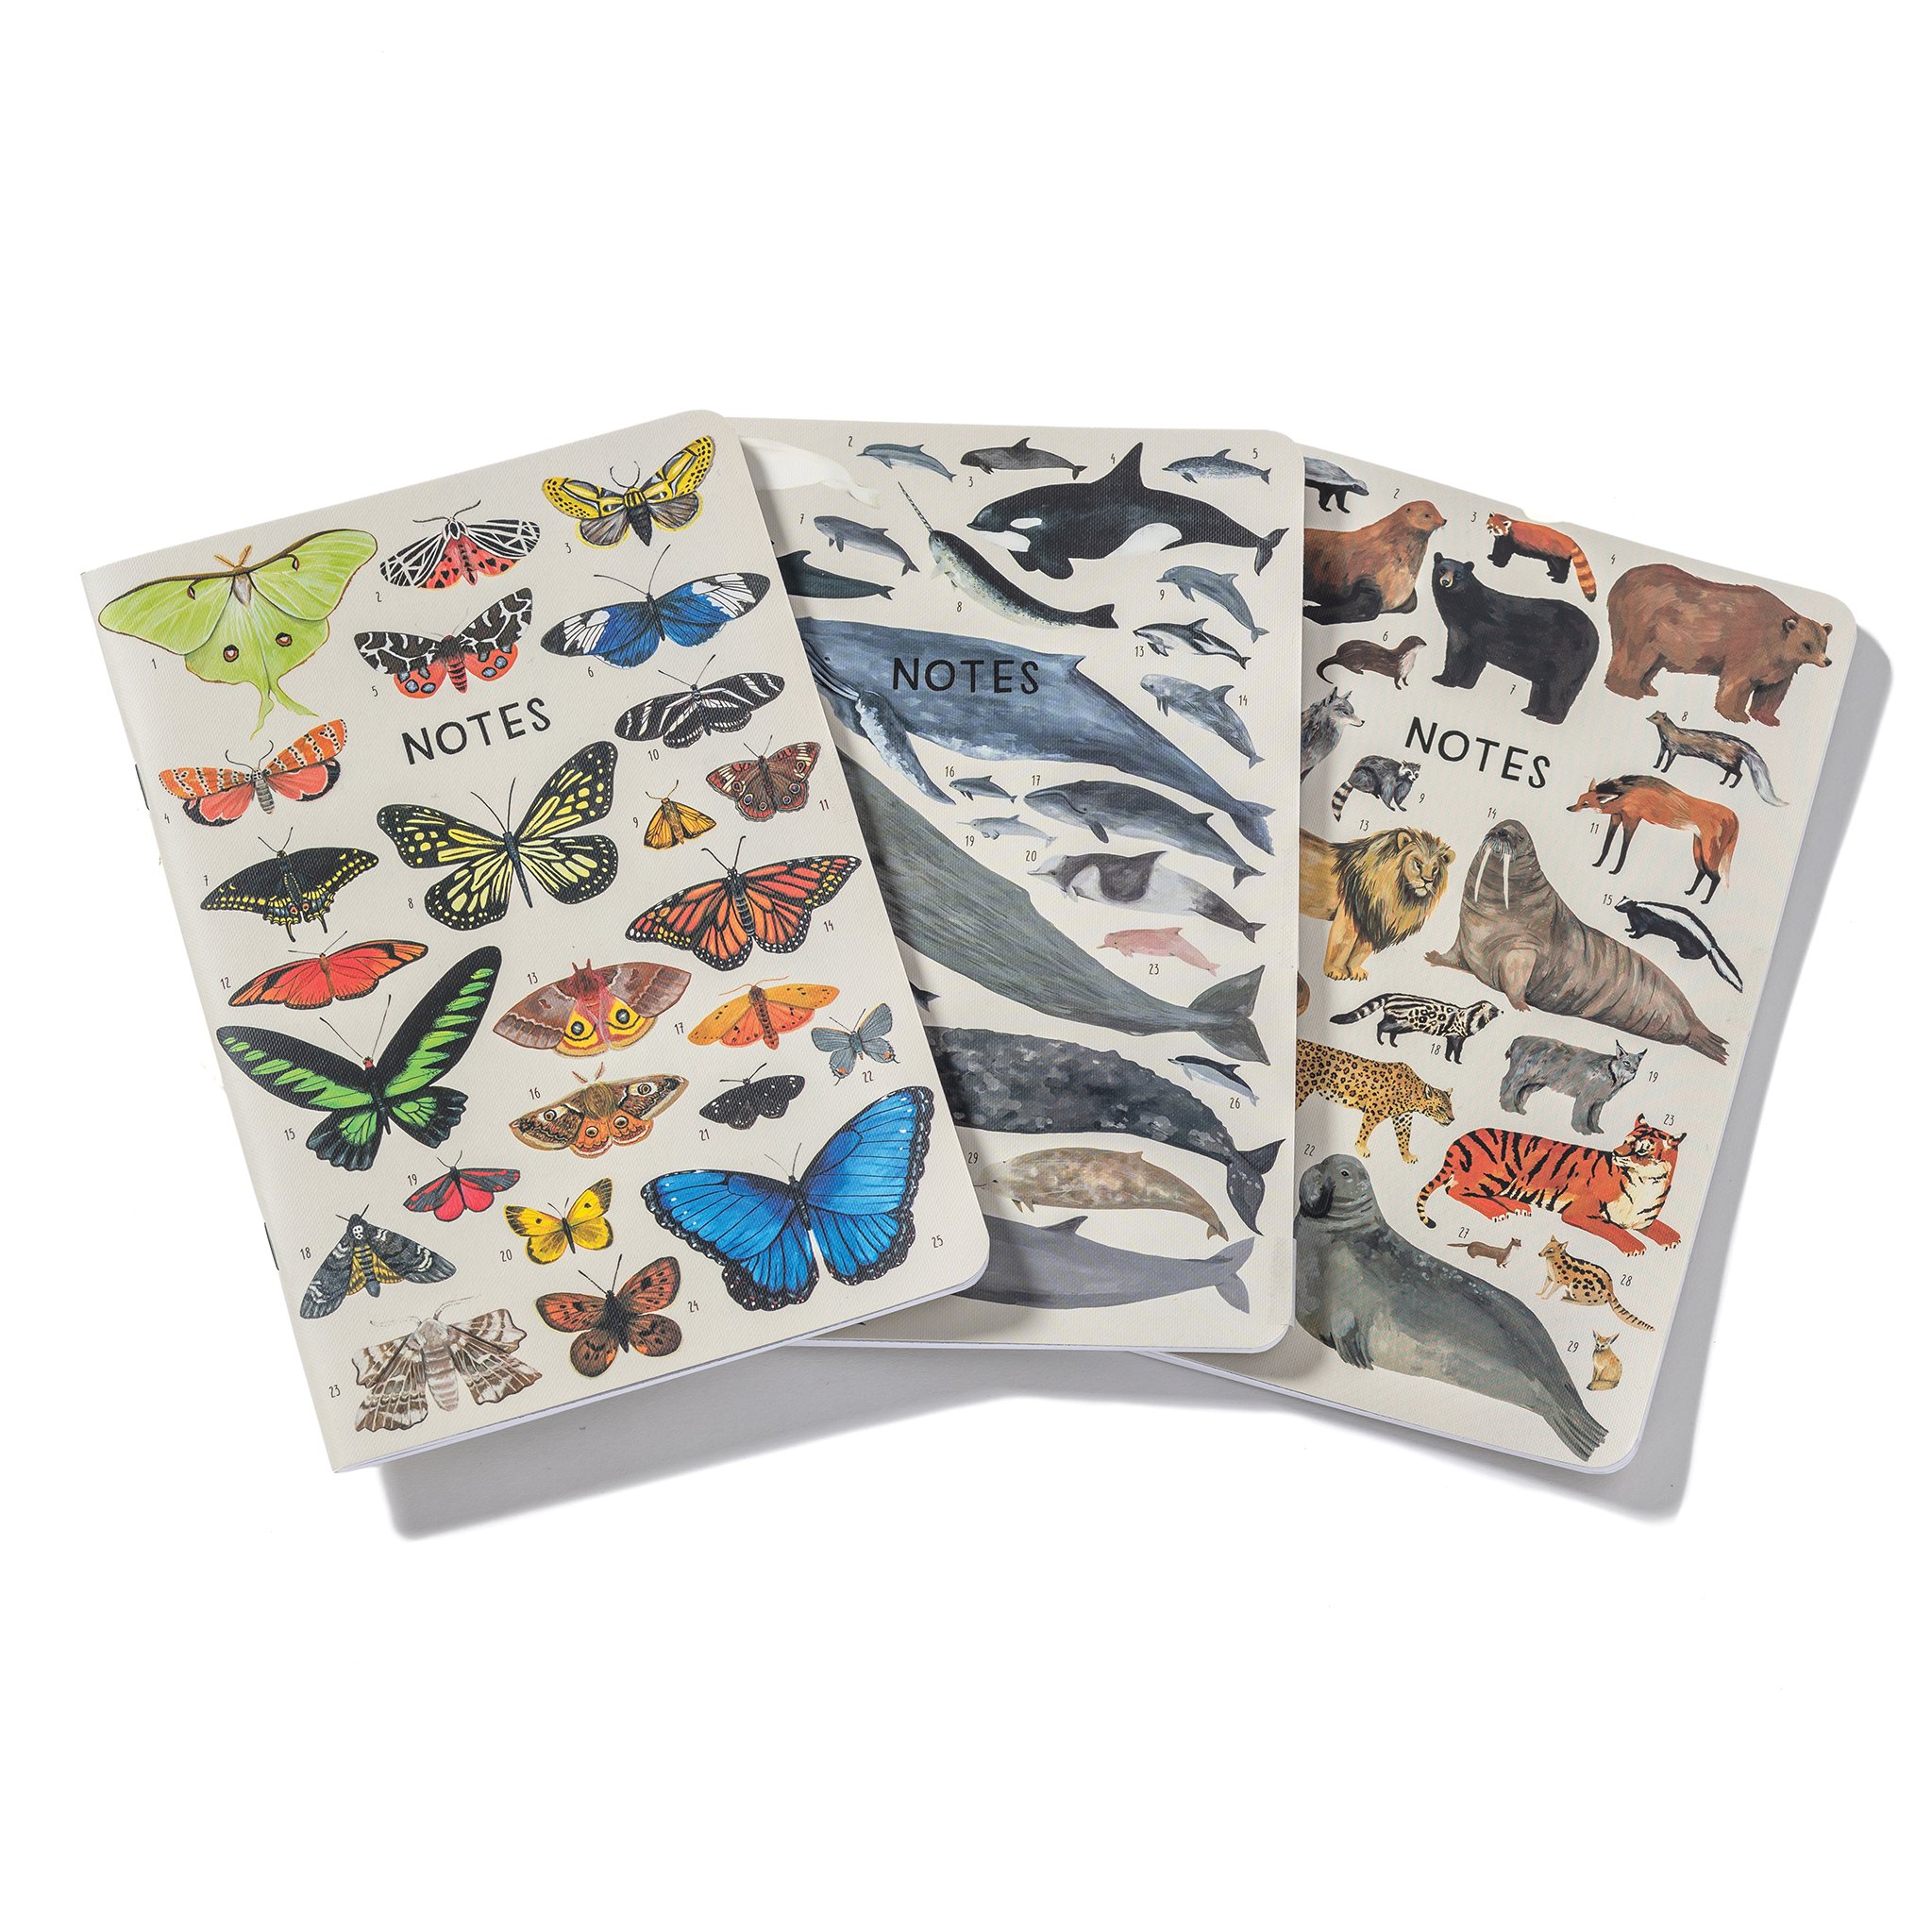 Orders of the Animals 3-Pack Notebook Set